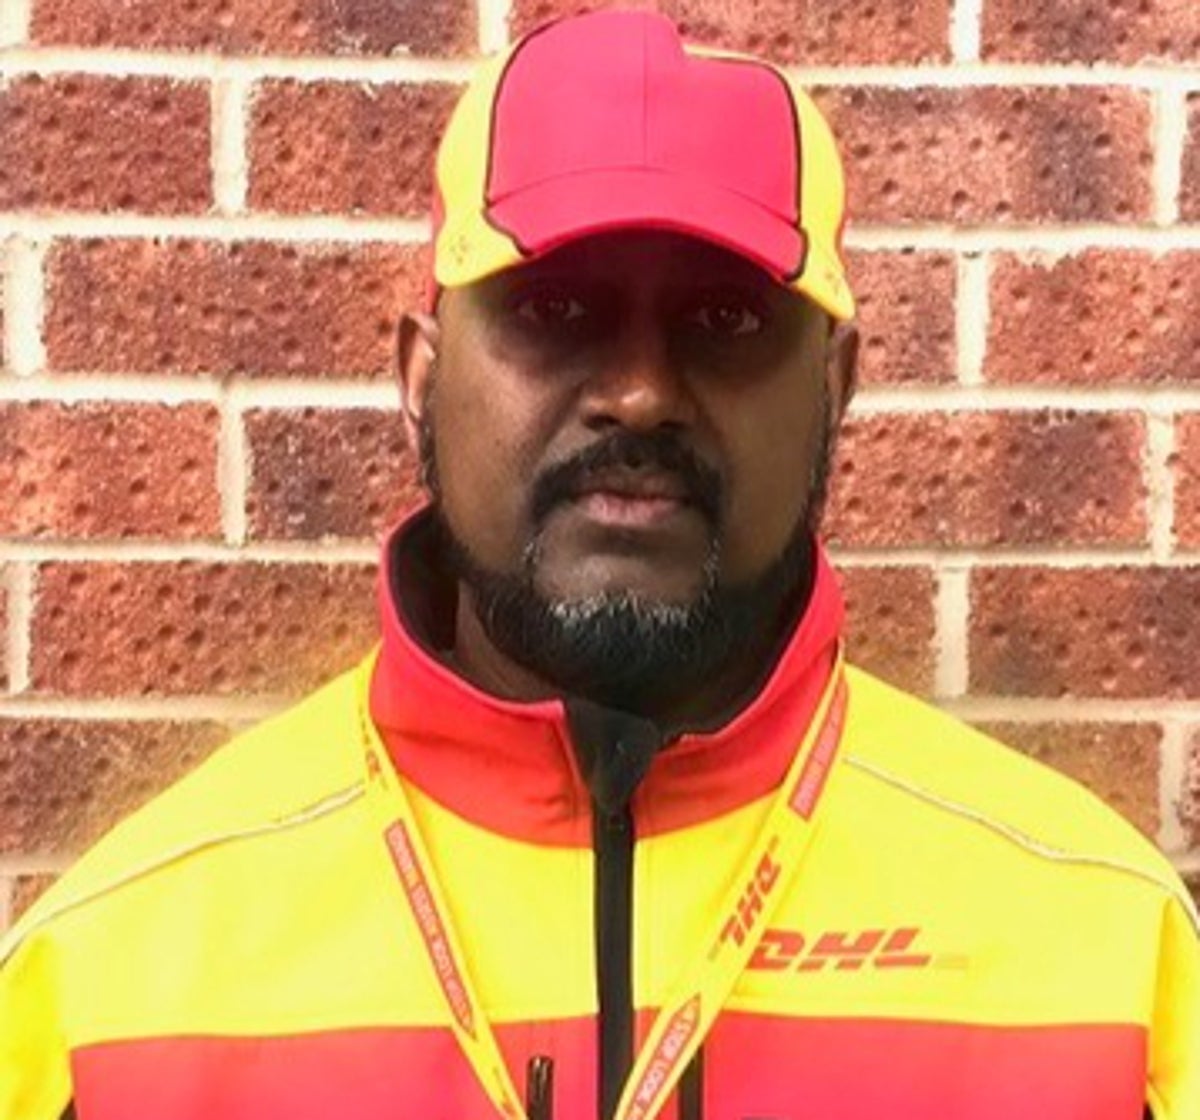 Black worker claims ‘racist’ DHL staff told him to ‘f*** off back to where you came from’